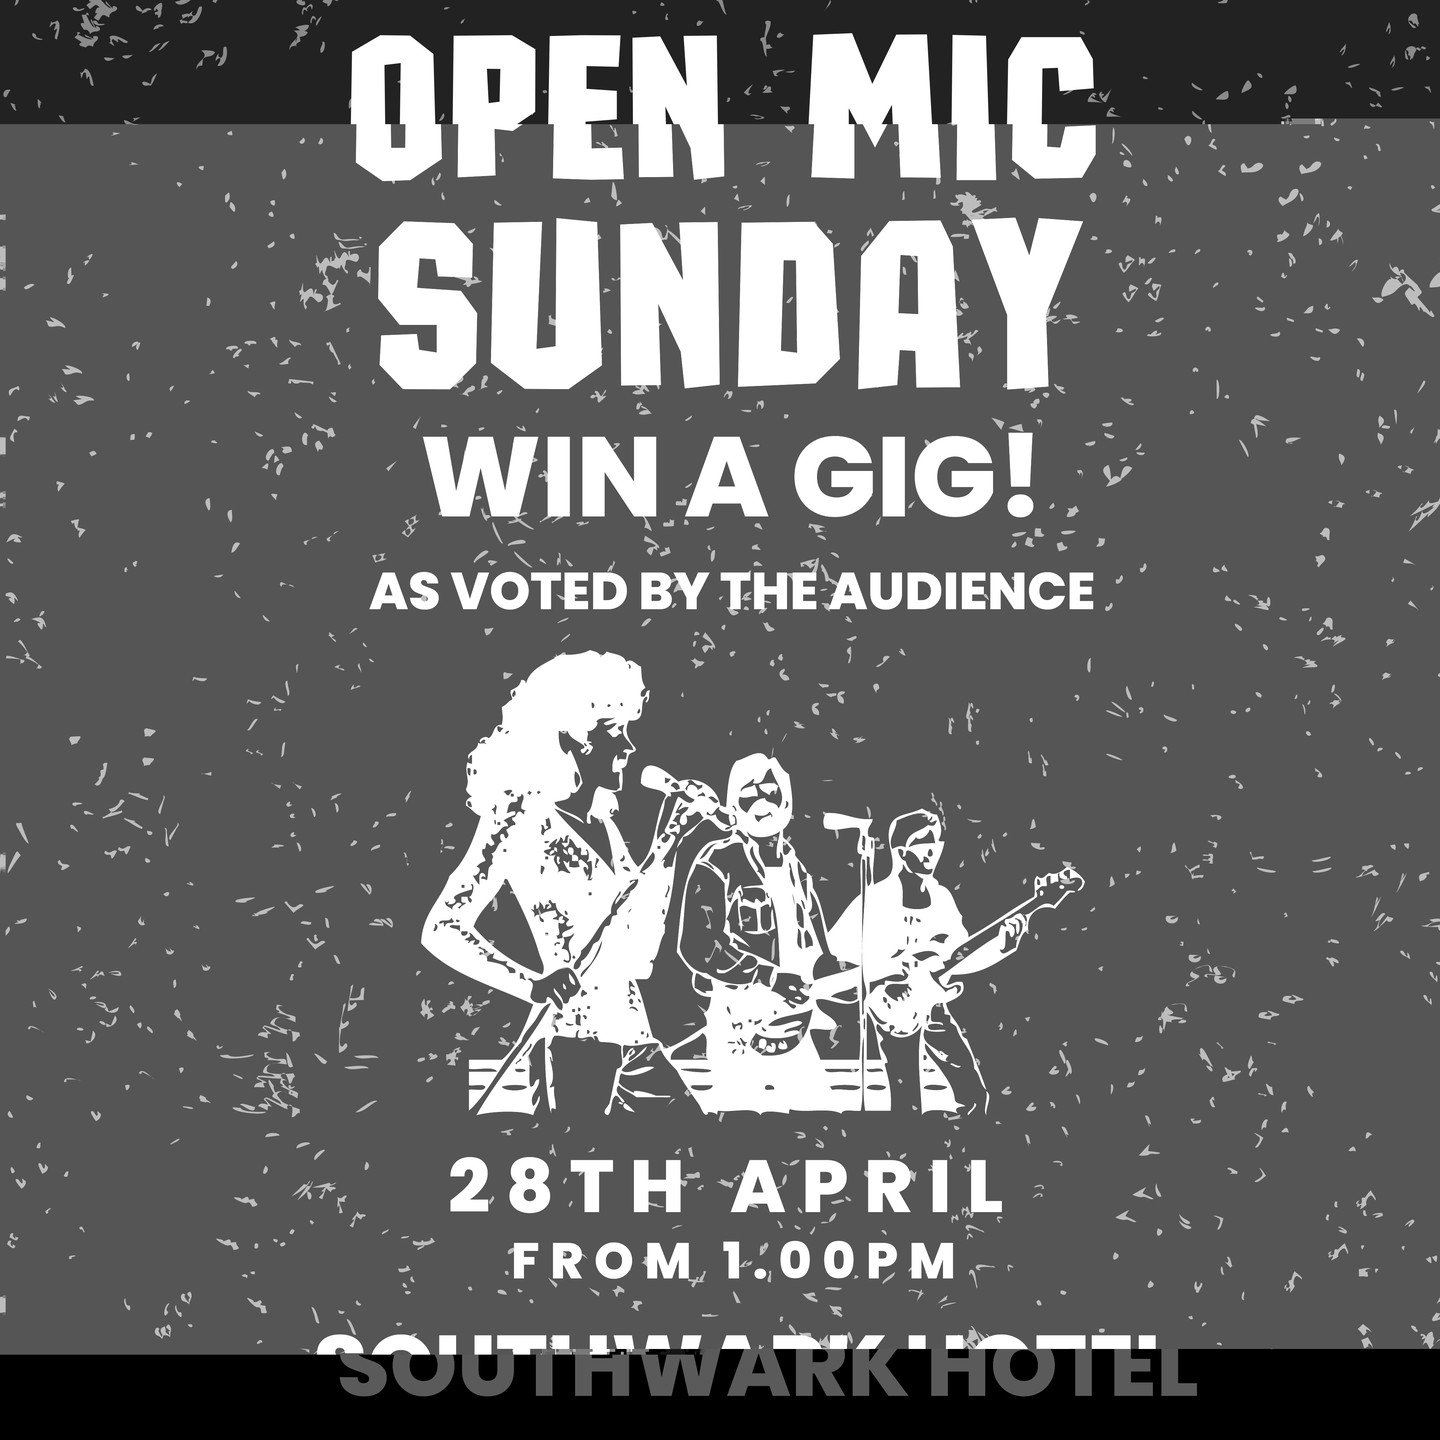 T O D A Y !

#southwarkhotel #southwarkpub #openmic #adelaideopenmic #music #acousticmusic #familyrun #supportlivemusicvenues #supportlivemusic #thebarton #adelaide #singersongwriter